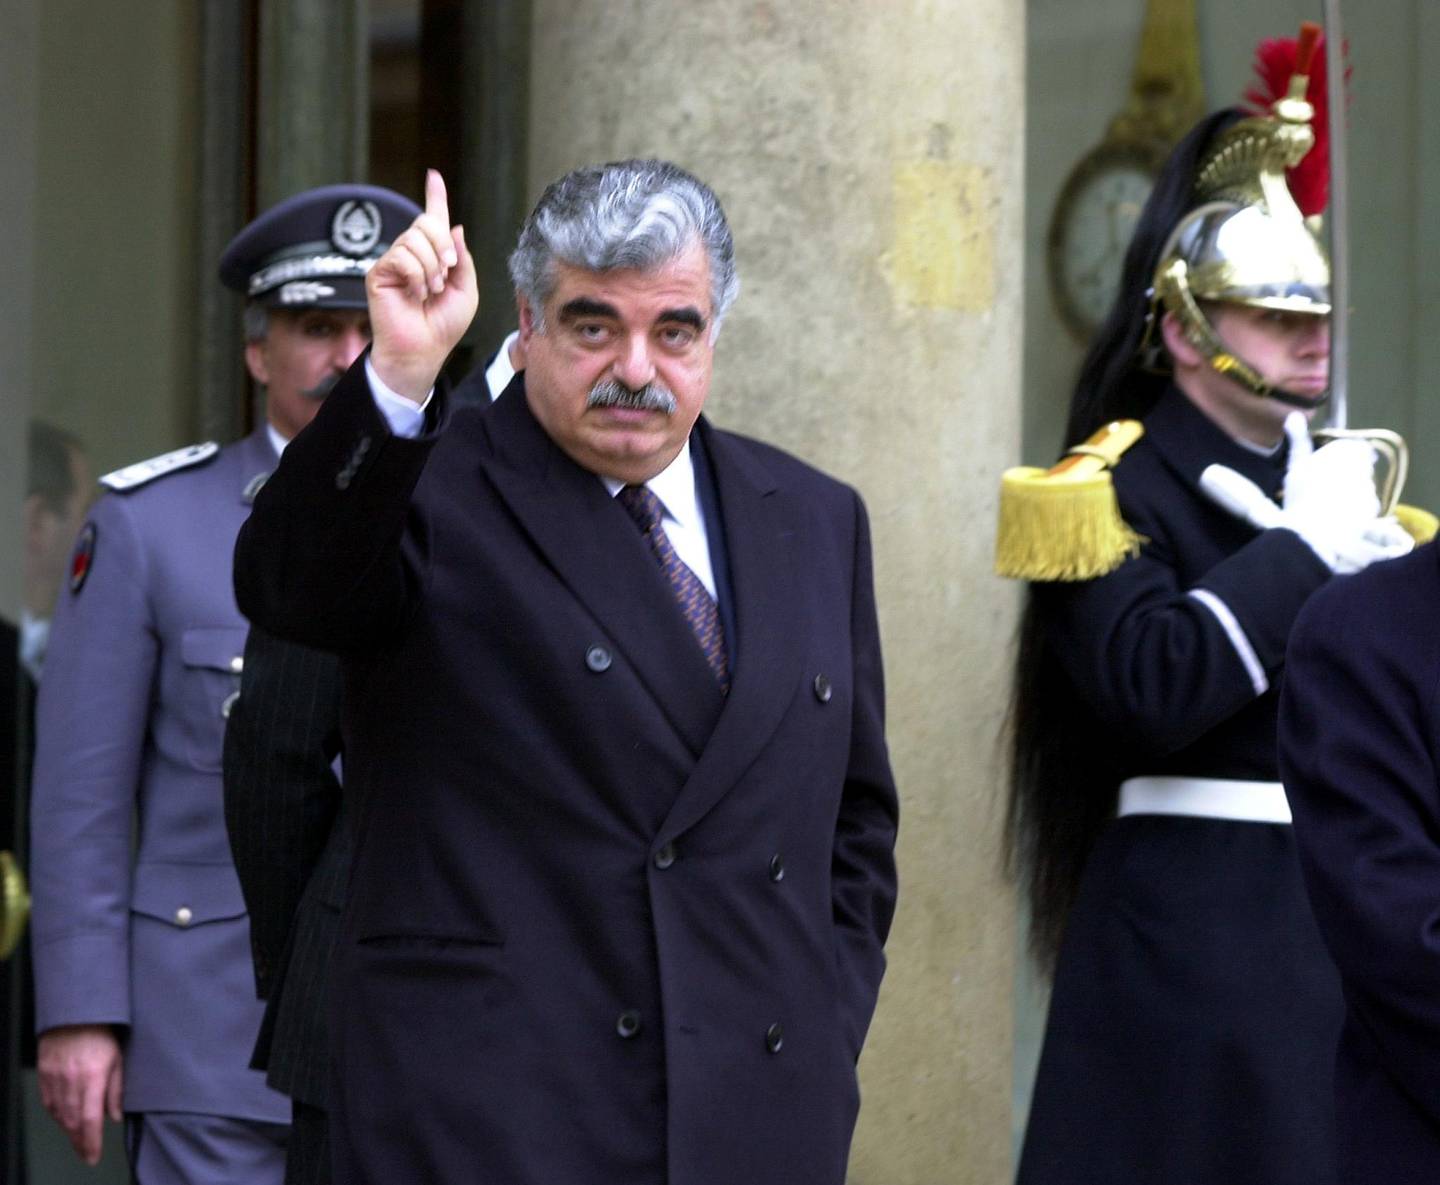 FILE PHOTO: Lebanese Prime Minister Rafik Hariri leaves the Elysee Palace following a meeting with French President Jacques Chirac in Paris, France February 27, 2001. REUTERS/Xavier Lhospice